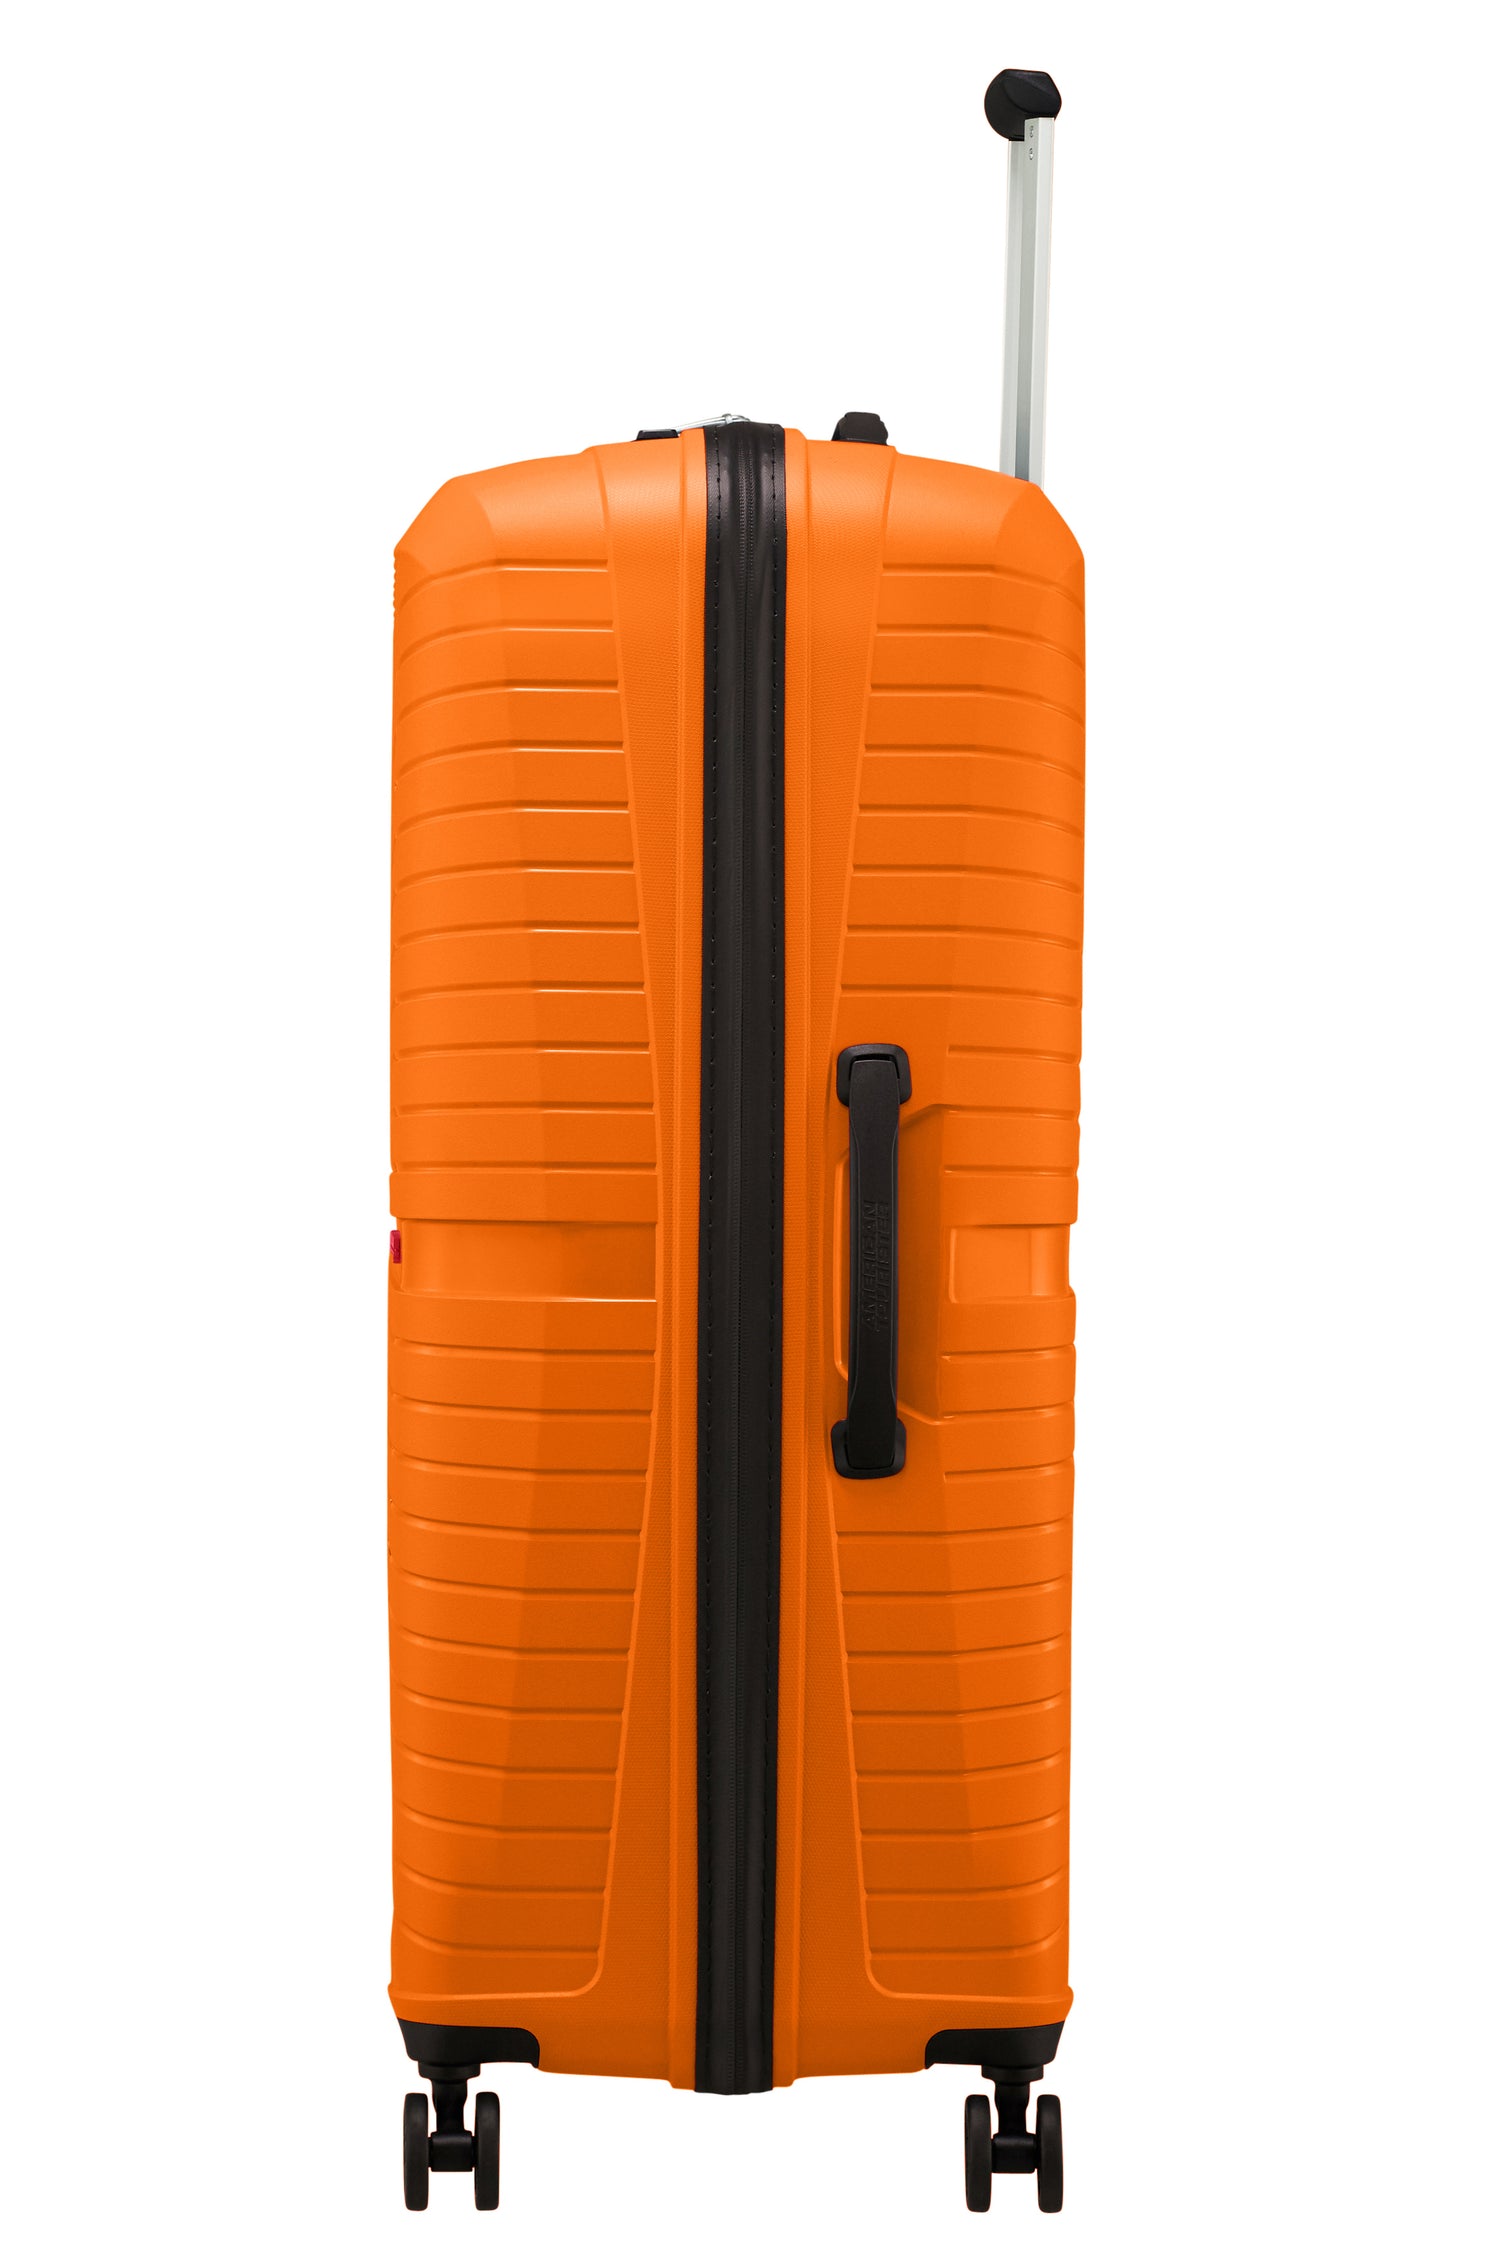 American Tourister Spinner Airconic 79cm